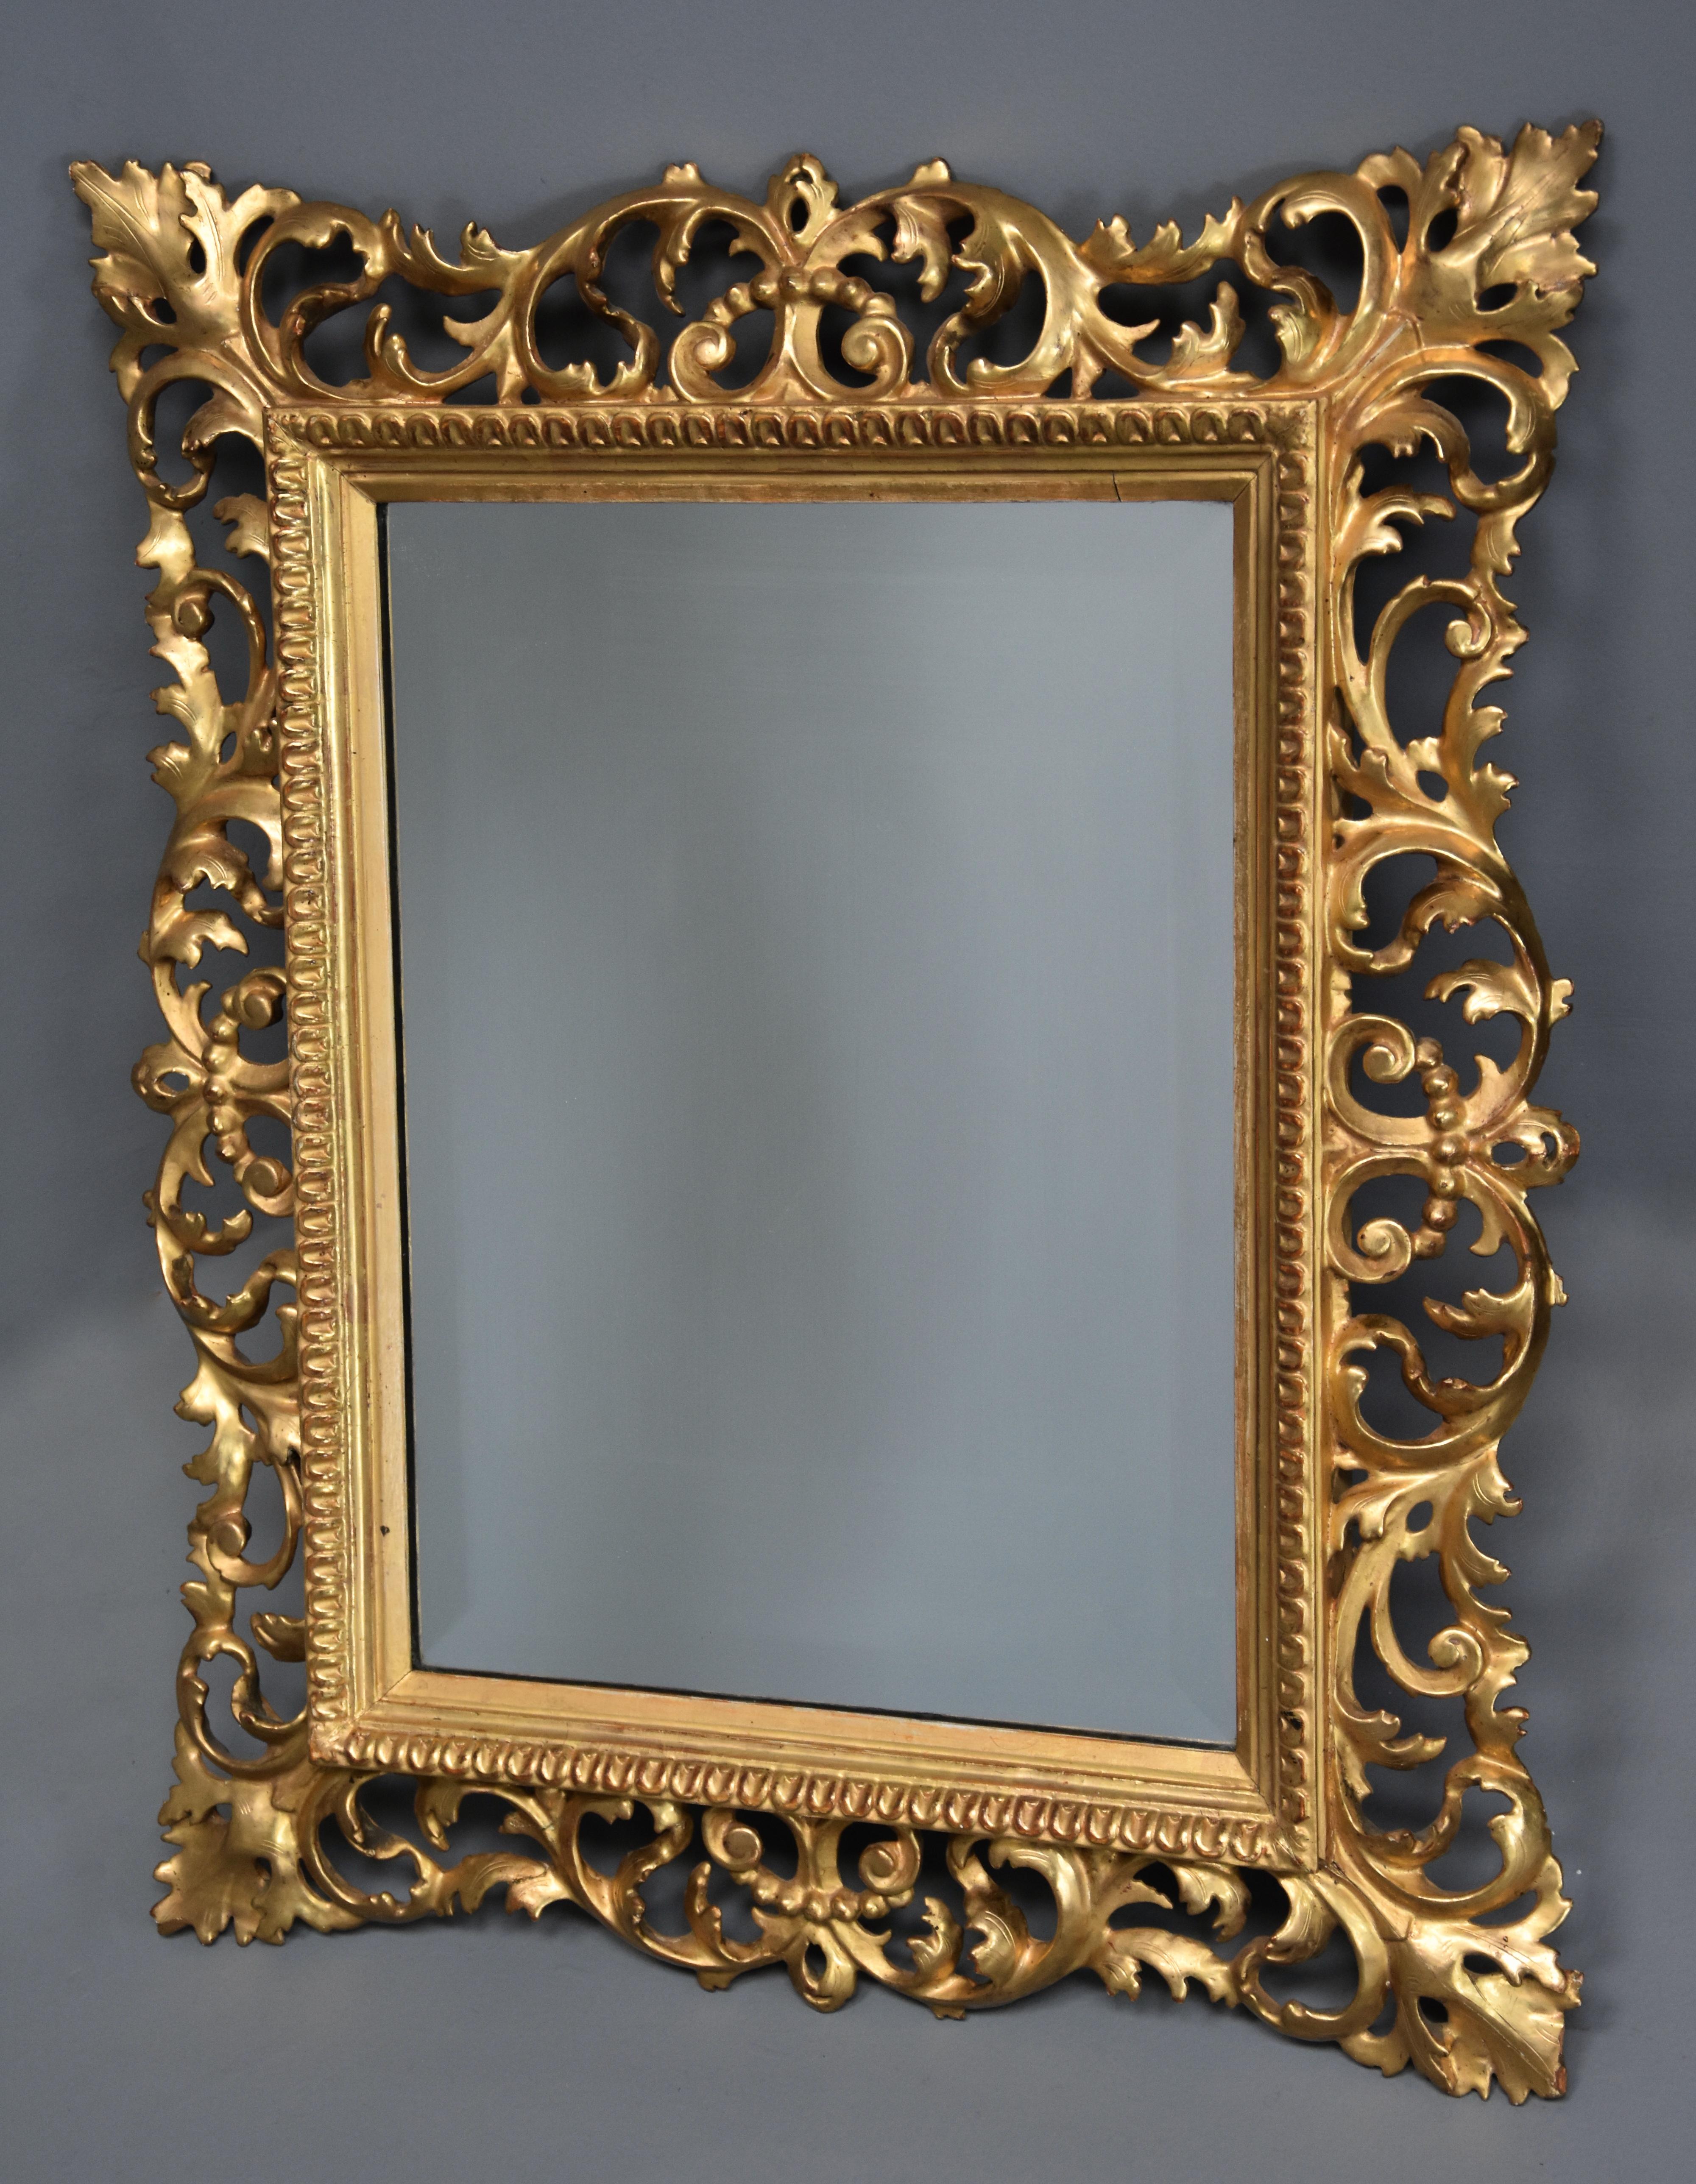 A late 19th century fine quality Florentine carved giltwood mirror.

This mirror consists of a finely carved gilt wooden frame of scrolling foliate decoration in very good original condition, the inner frame with a carved border design, the